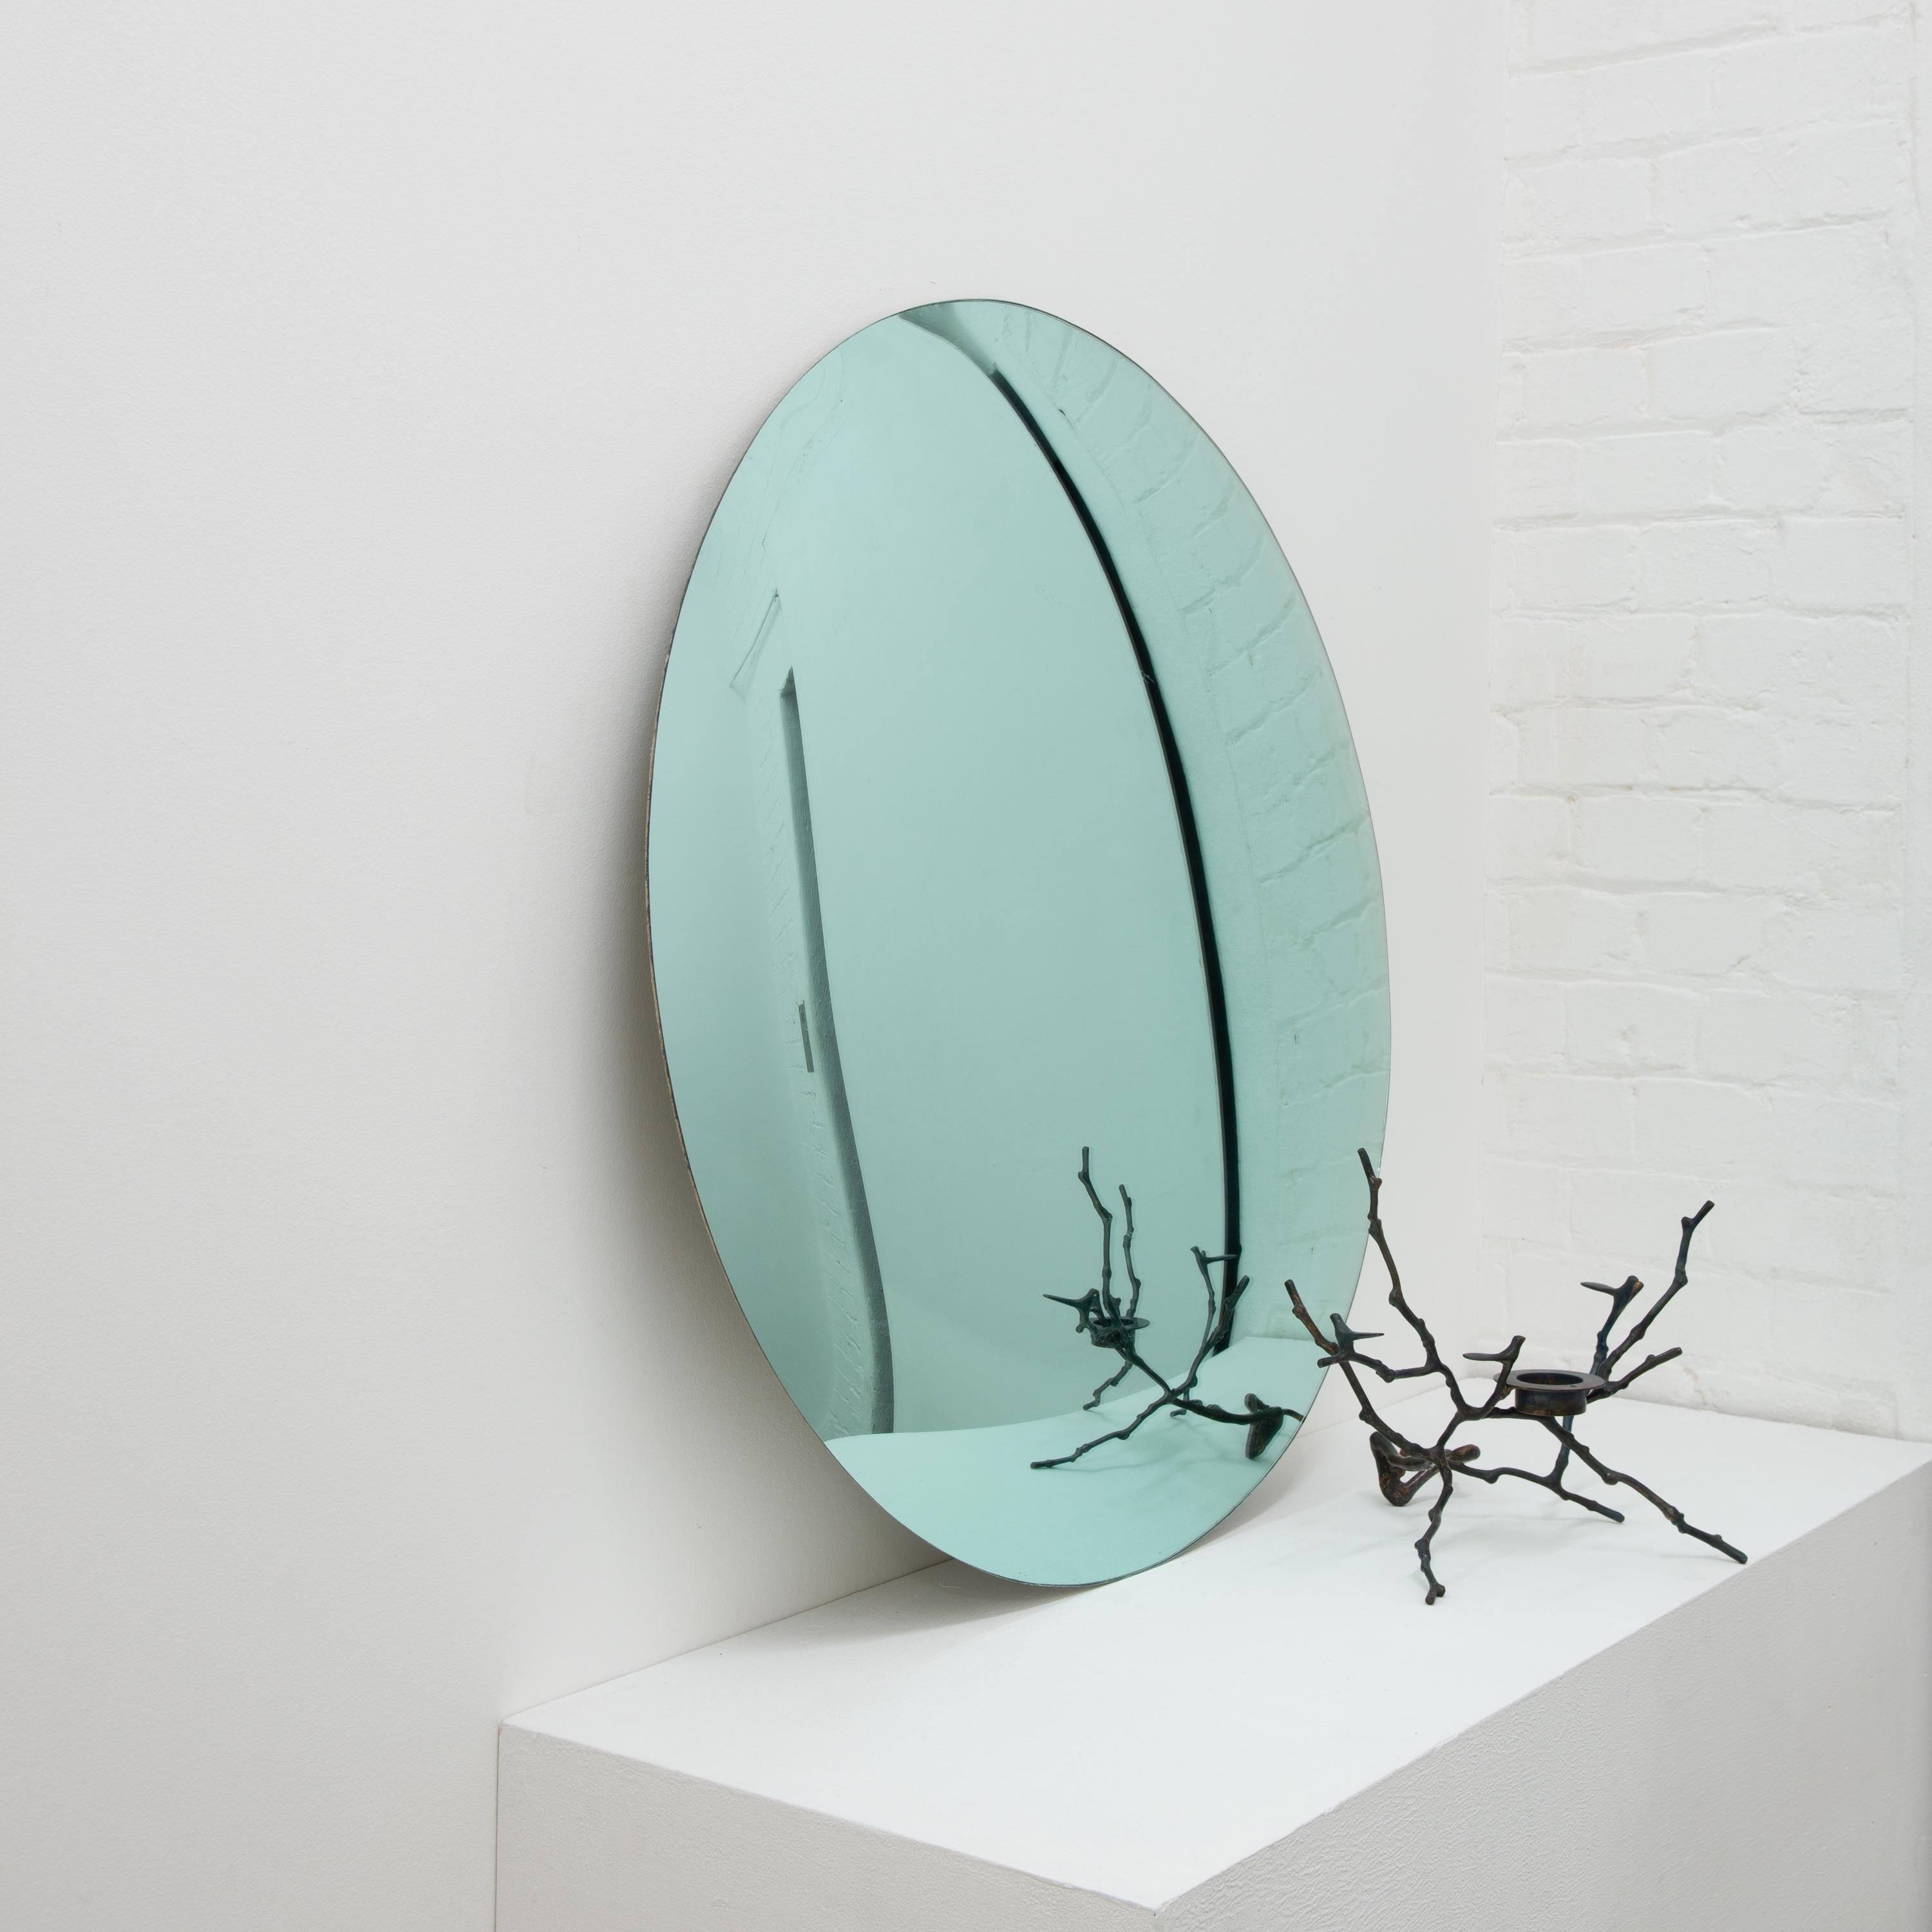 Contemporary green tinted convex frameless mirror.

Each Orbis™ convex mirror is designed and handcrafted in London, UK. Slight variations in sizes and imperfections on edges and surface finishes are characteristics of such original handmade